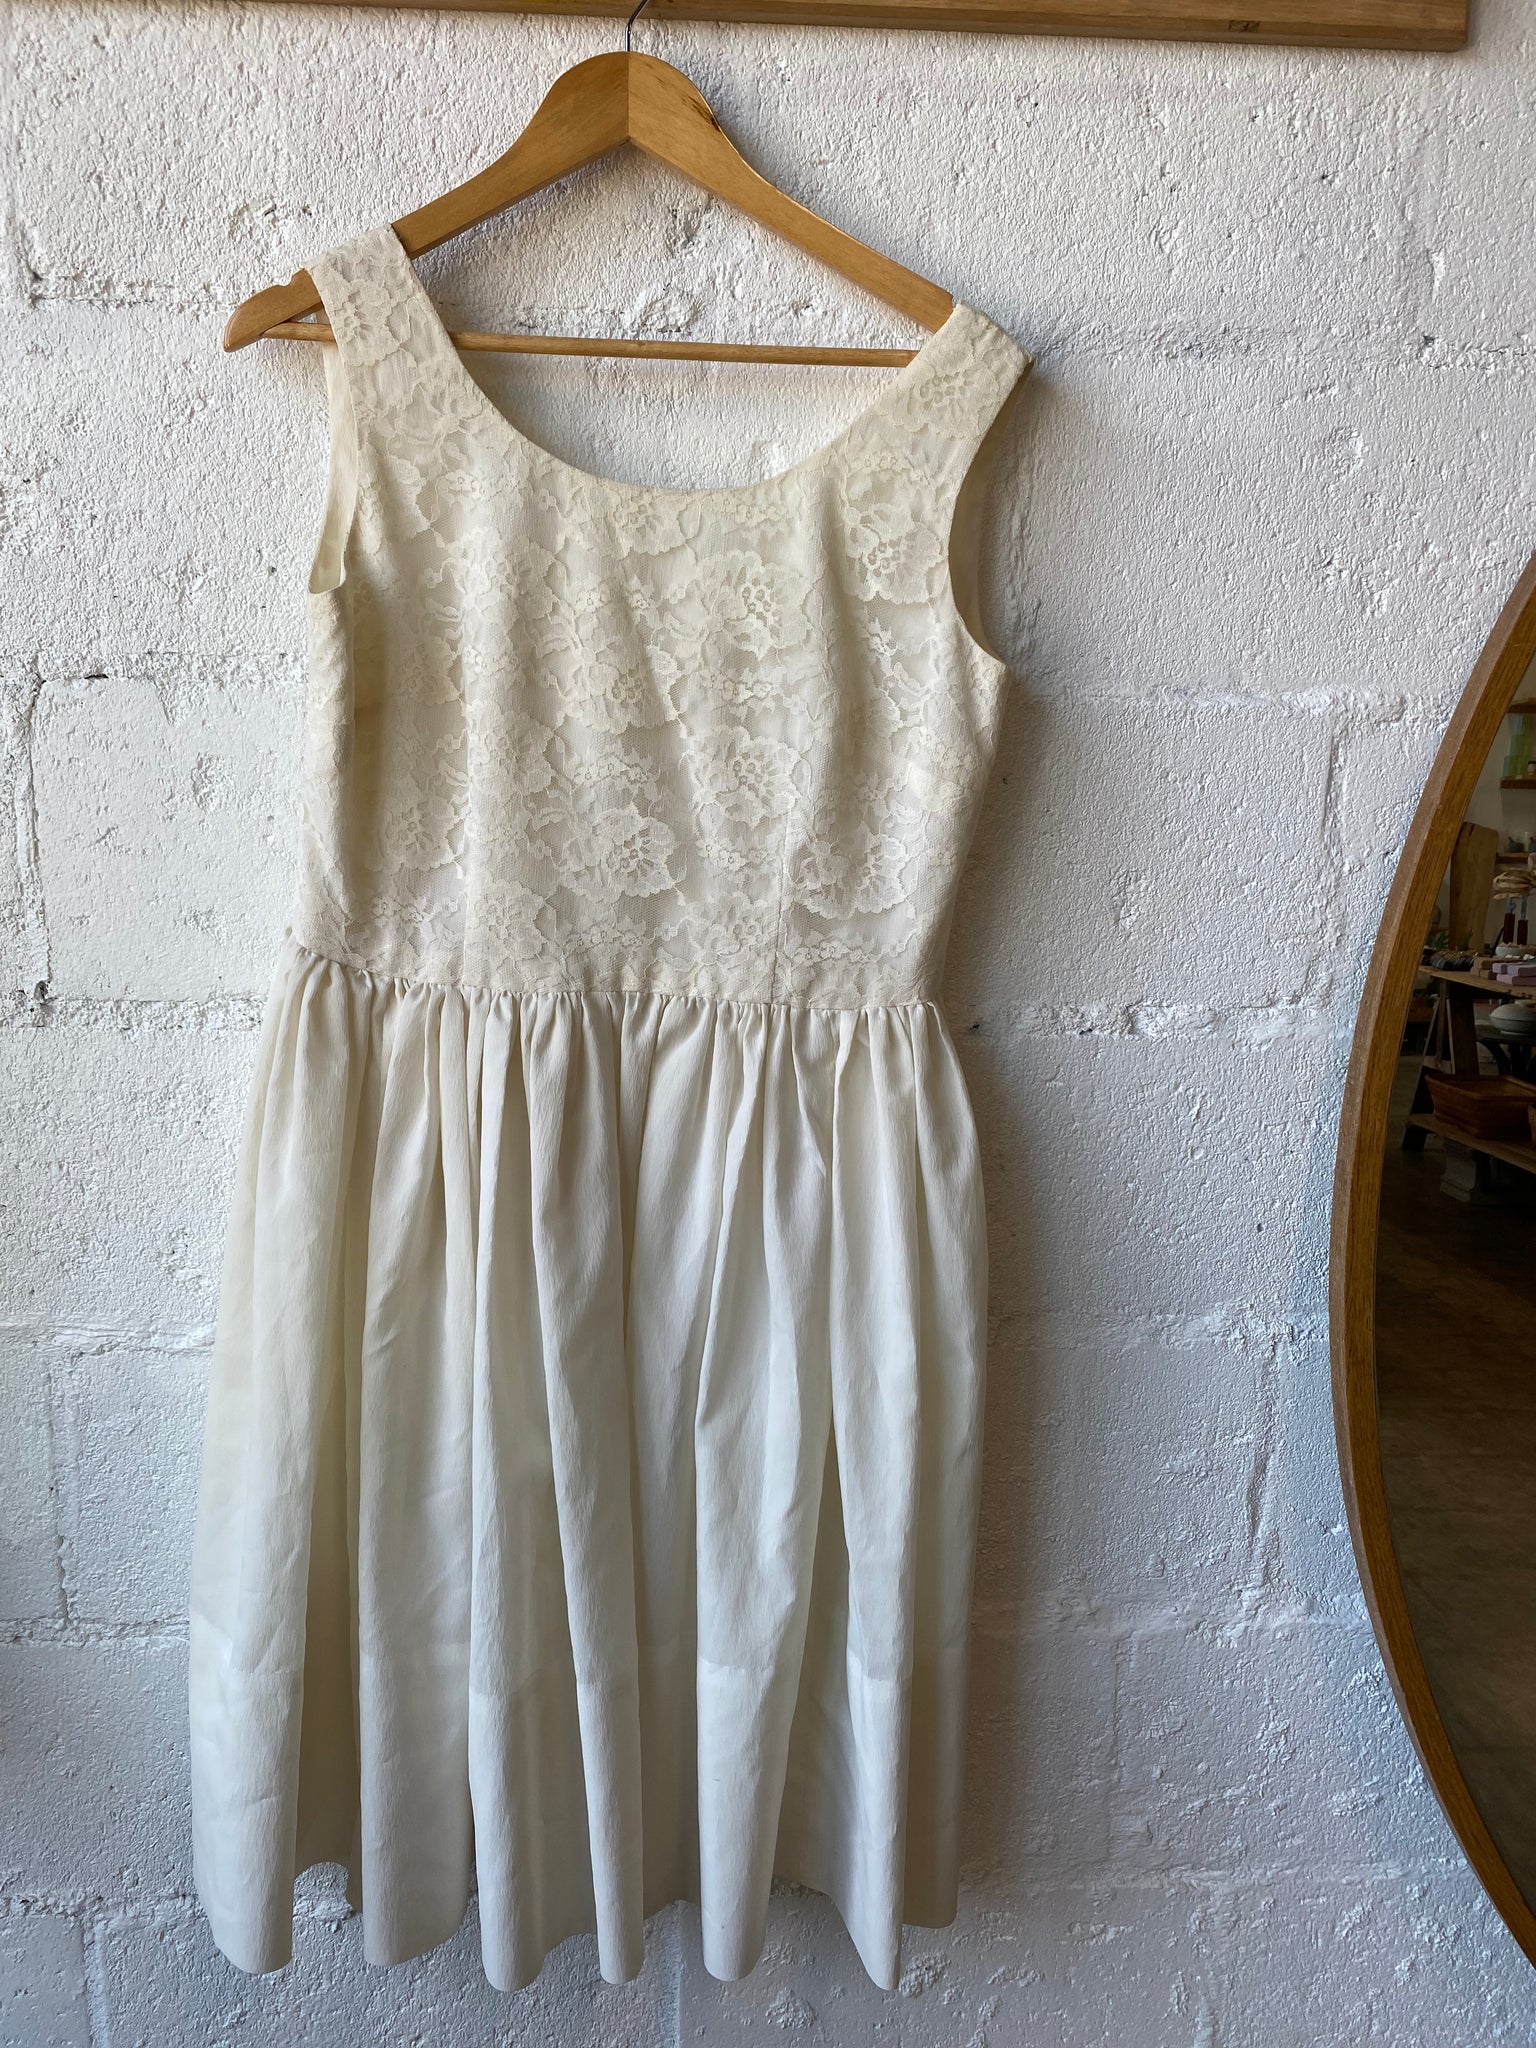 Vintage Handmade Fit and Flare Dress